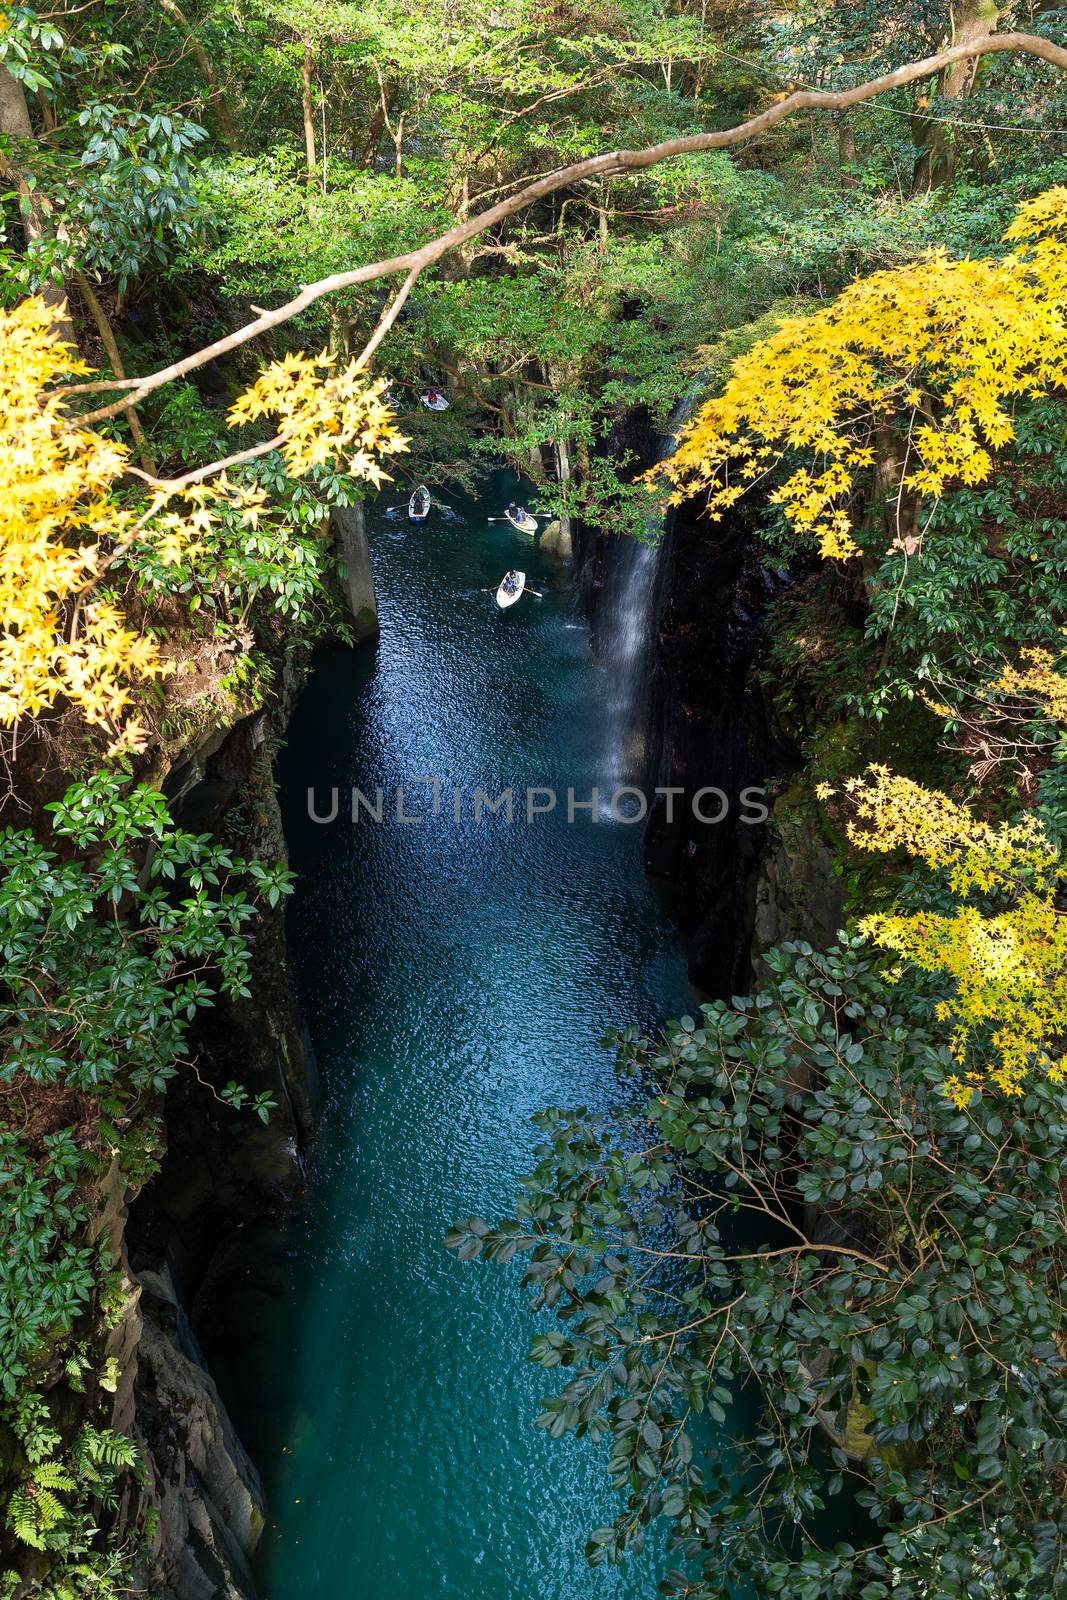 Takachiho Gorge in Japan at autumn